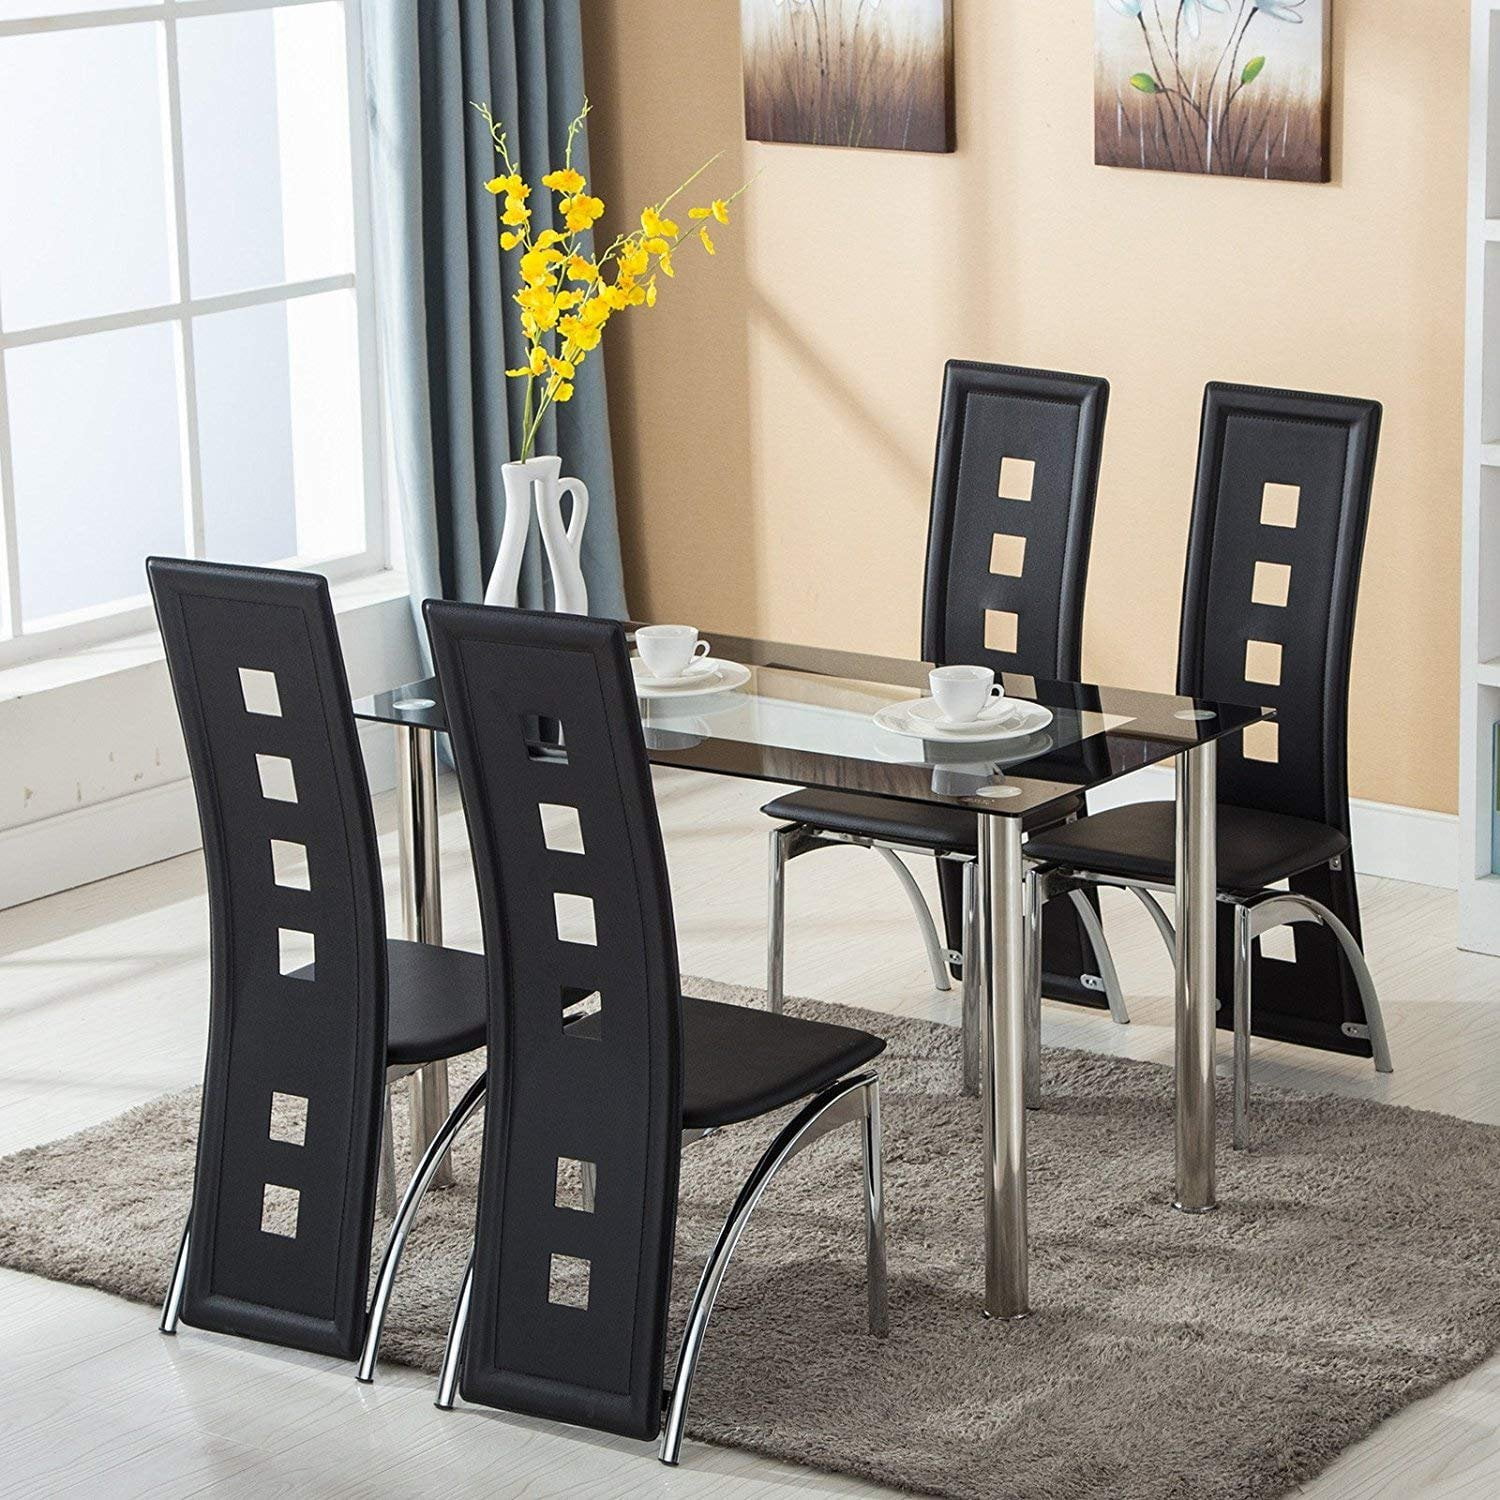 5 Piece Dining Room Table Sets, Heavy-Duty Glass Dining Table with 4